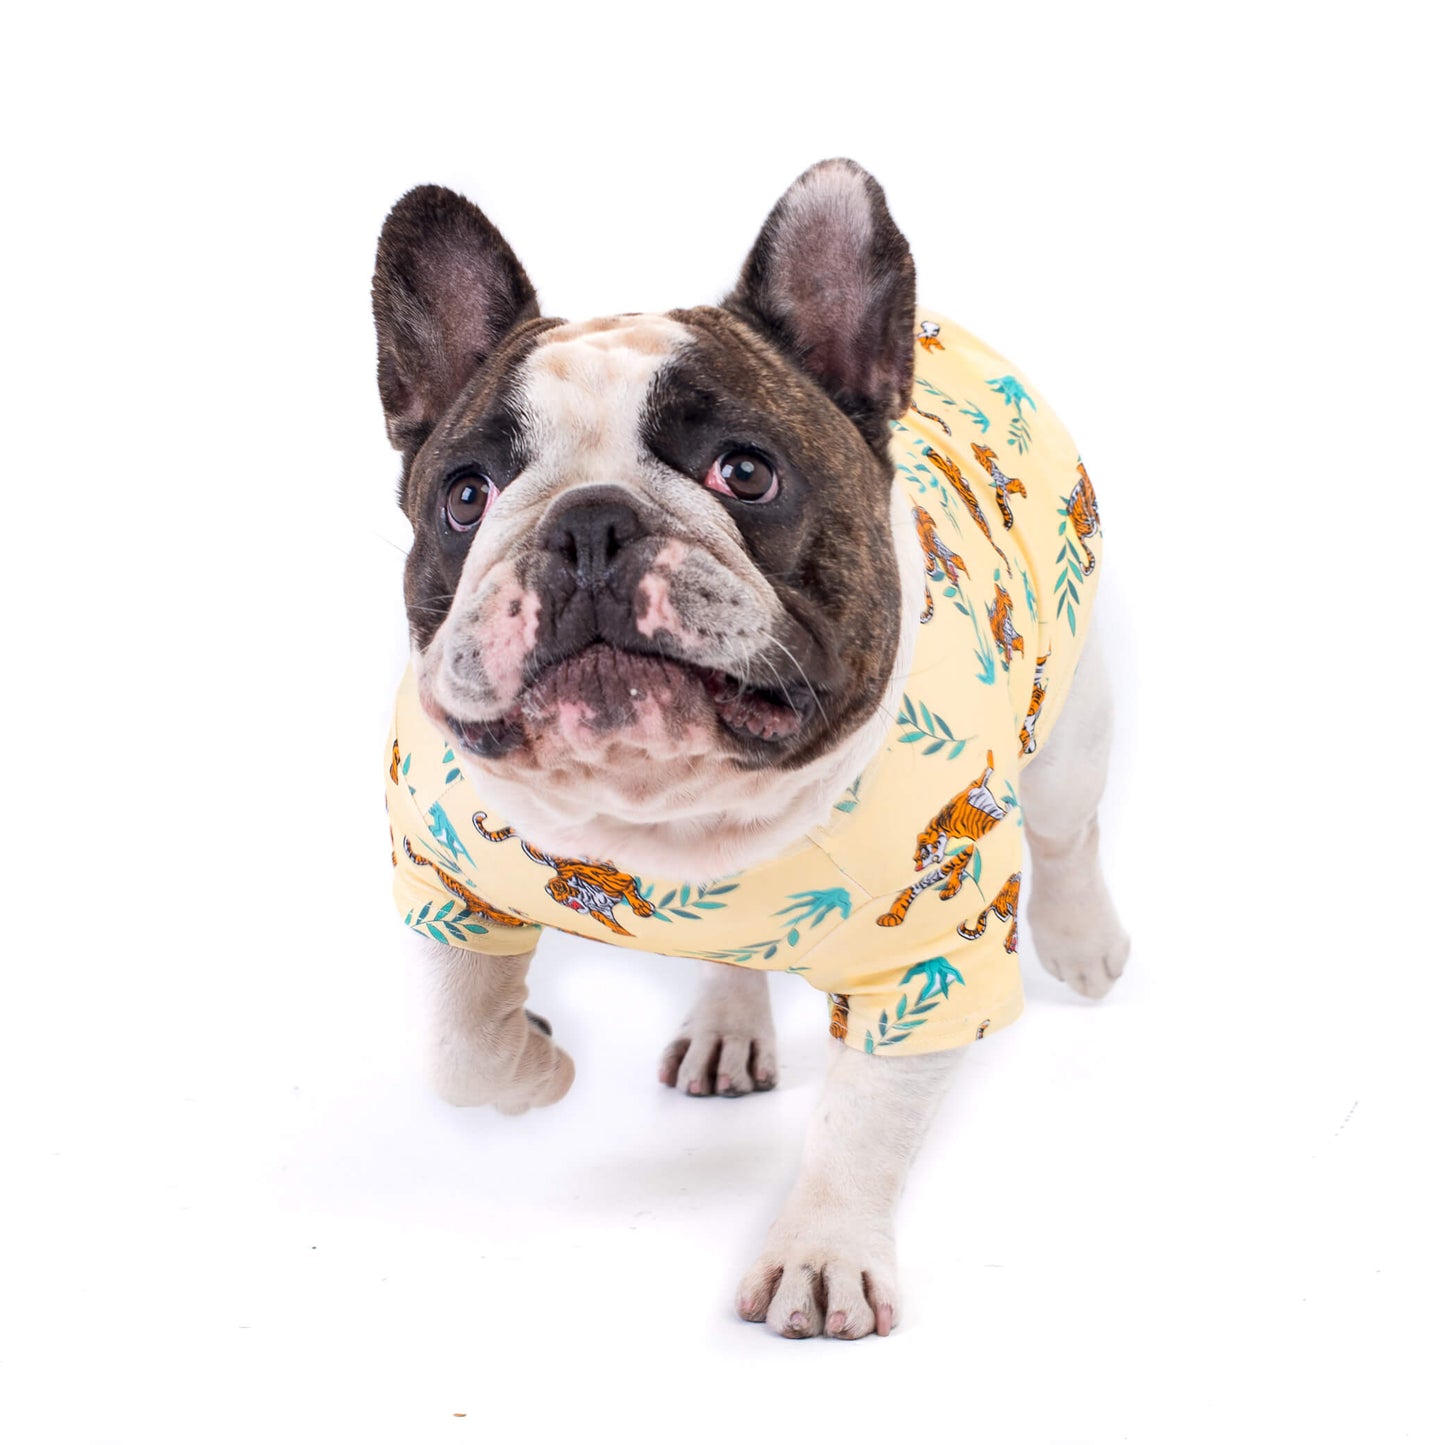 French bulldog in Wild Child dog shirt by Vibrant Hound, featuring yellow shirt with orange tiger prints